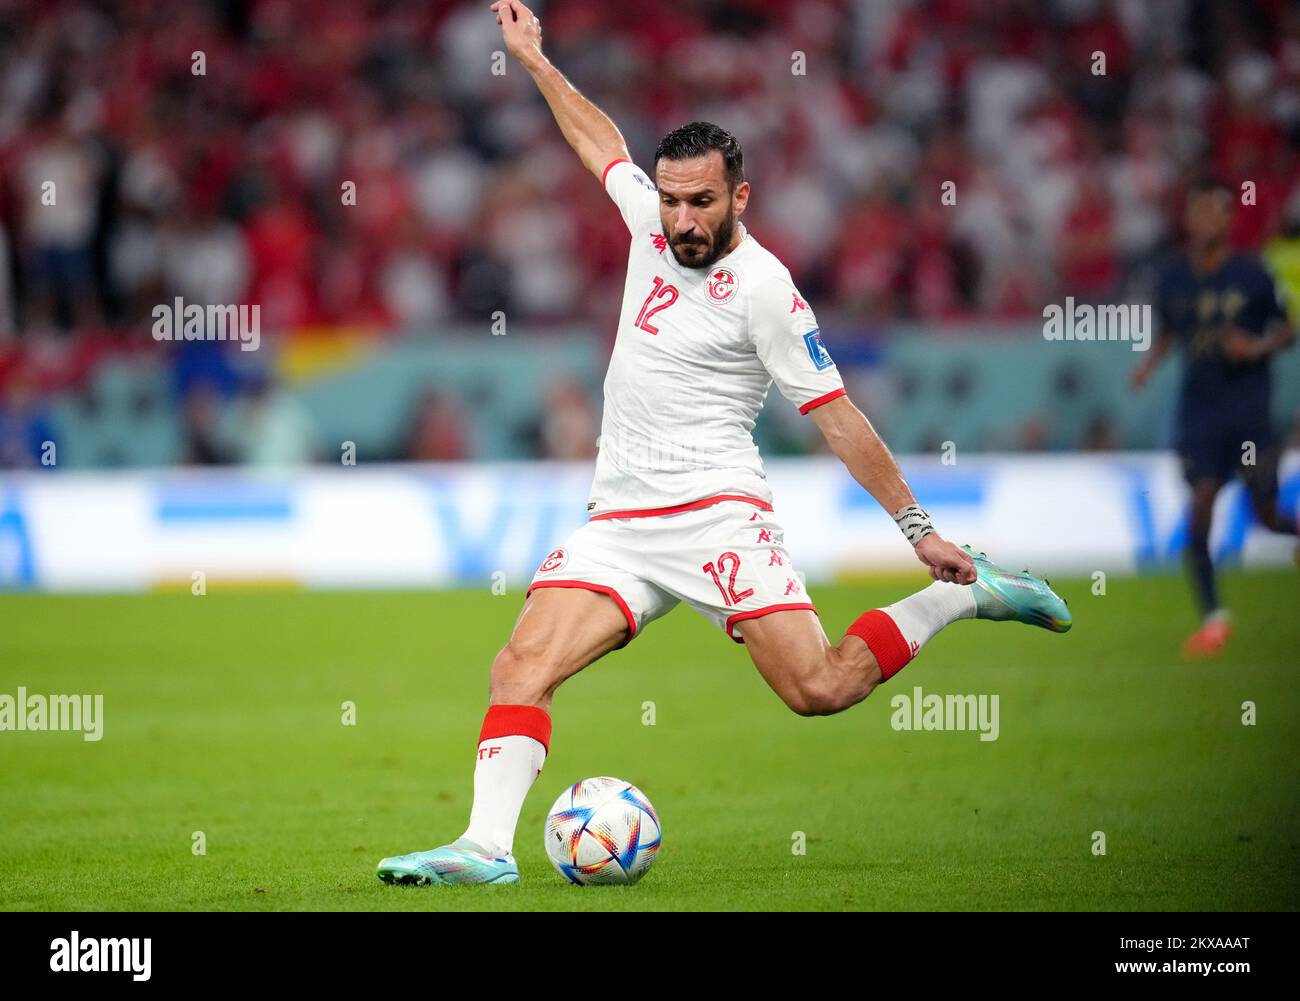 Tunisia's Ali Maaloul during the FIFA World Cup Group D match at the Education City Stadium in Al Rayyan, Qatar. Picture date: Wednesday November 30, 2022. Stock Photo